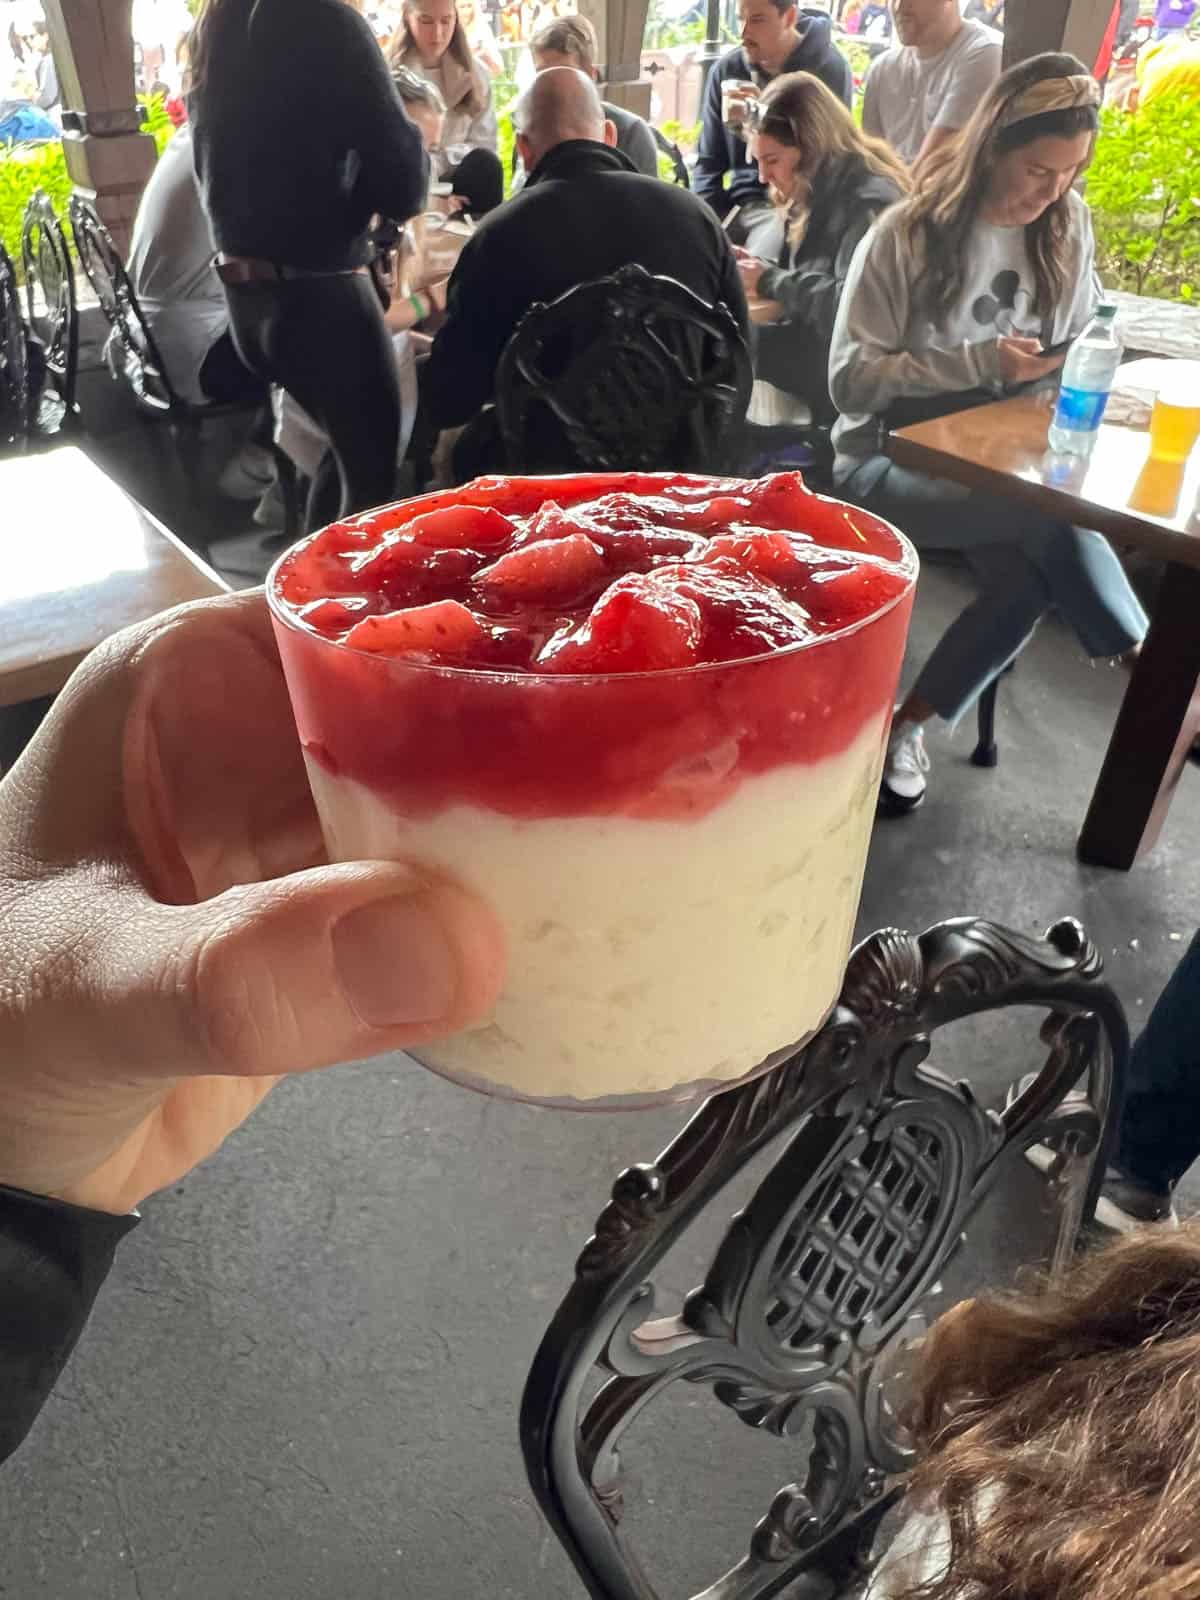 Rice cream with strawberry sauce in the Norway region at Epcot.